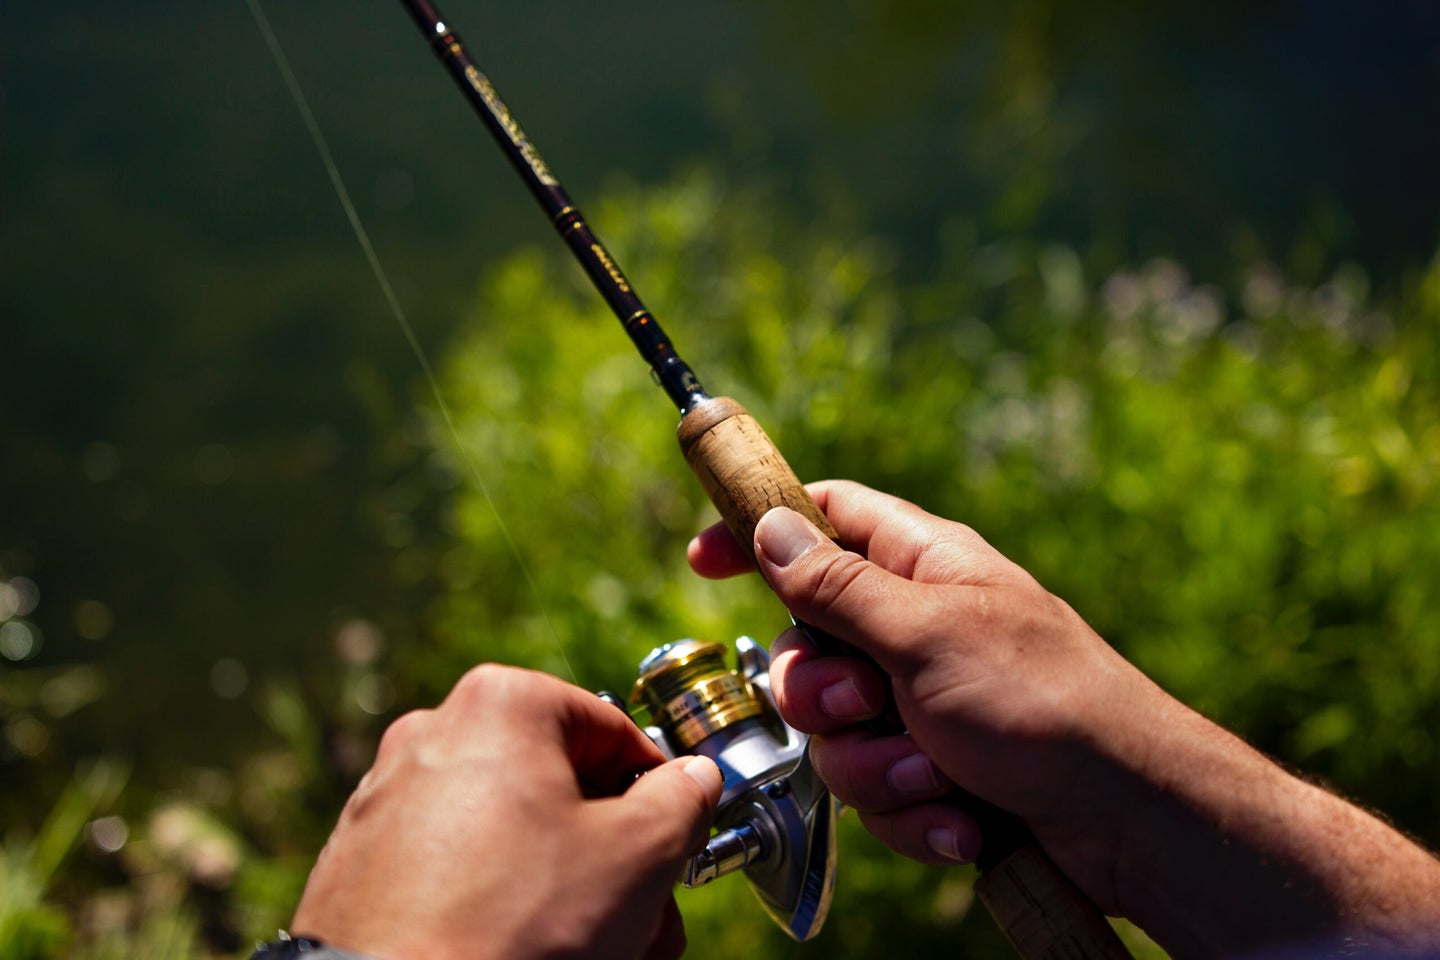 Spinning Fishing Reels Smooth Powerful Light Weight for Rivers, Ponds,  Streams Red Strip Line 